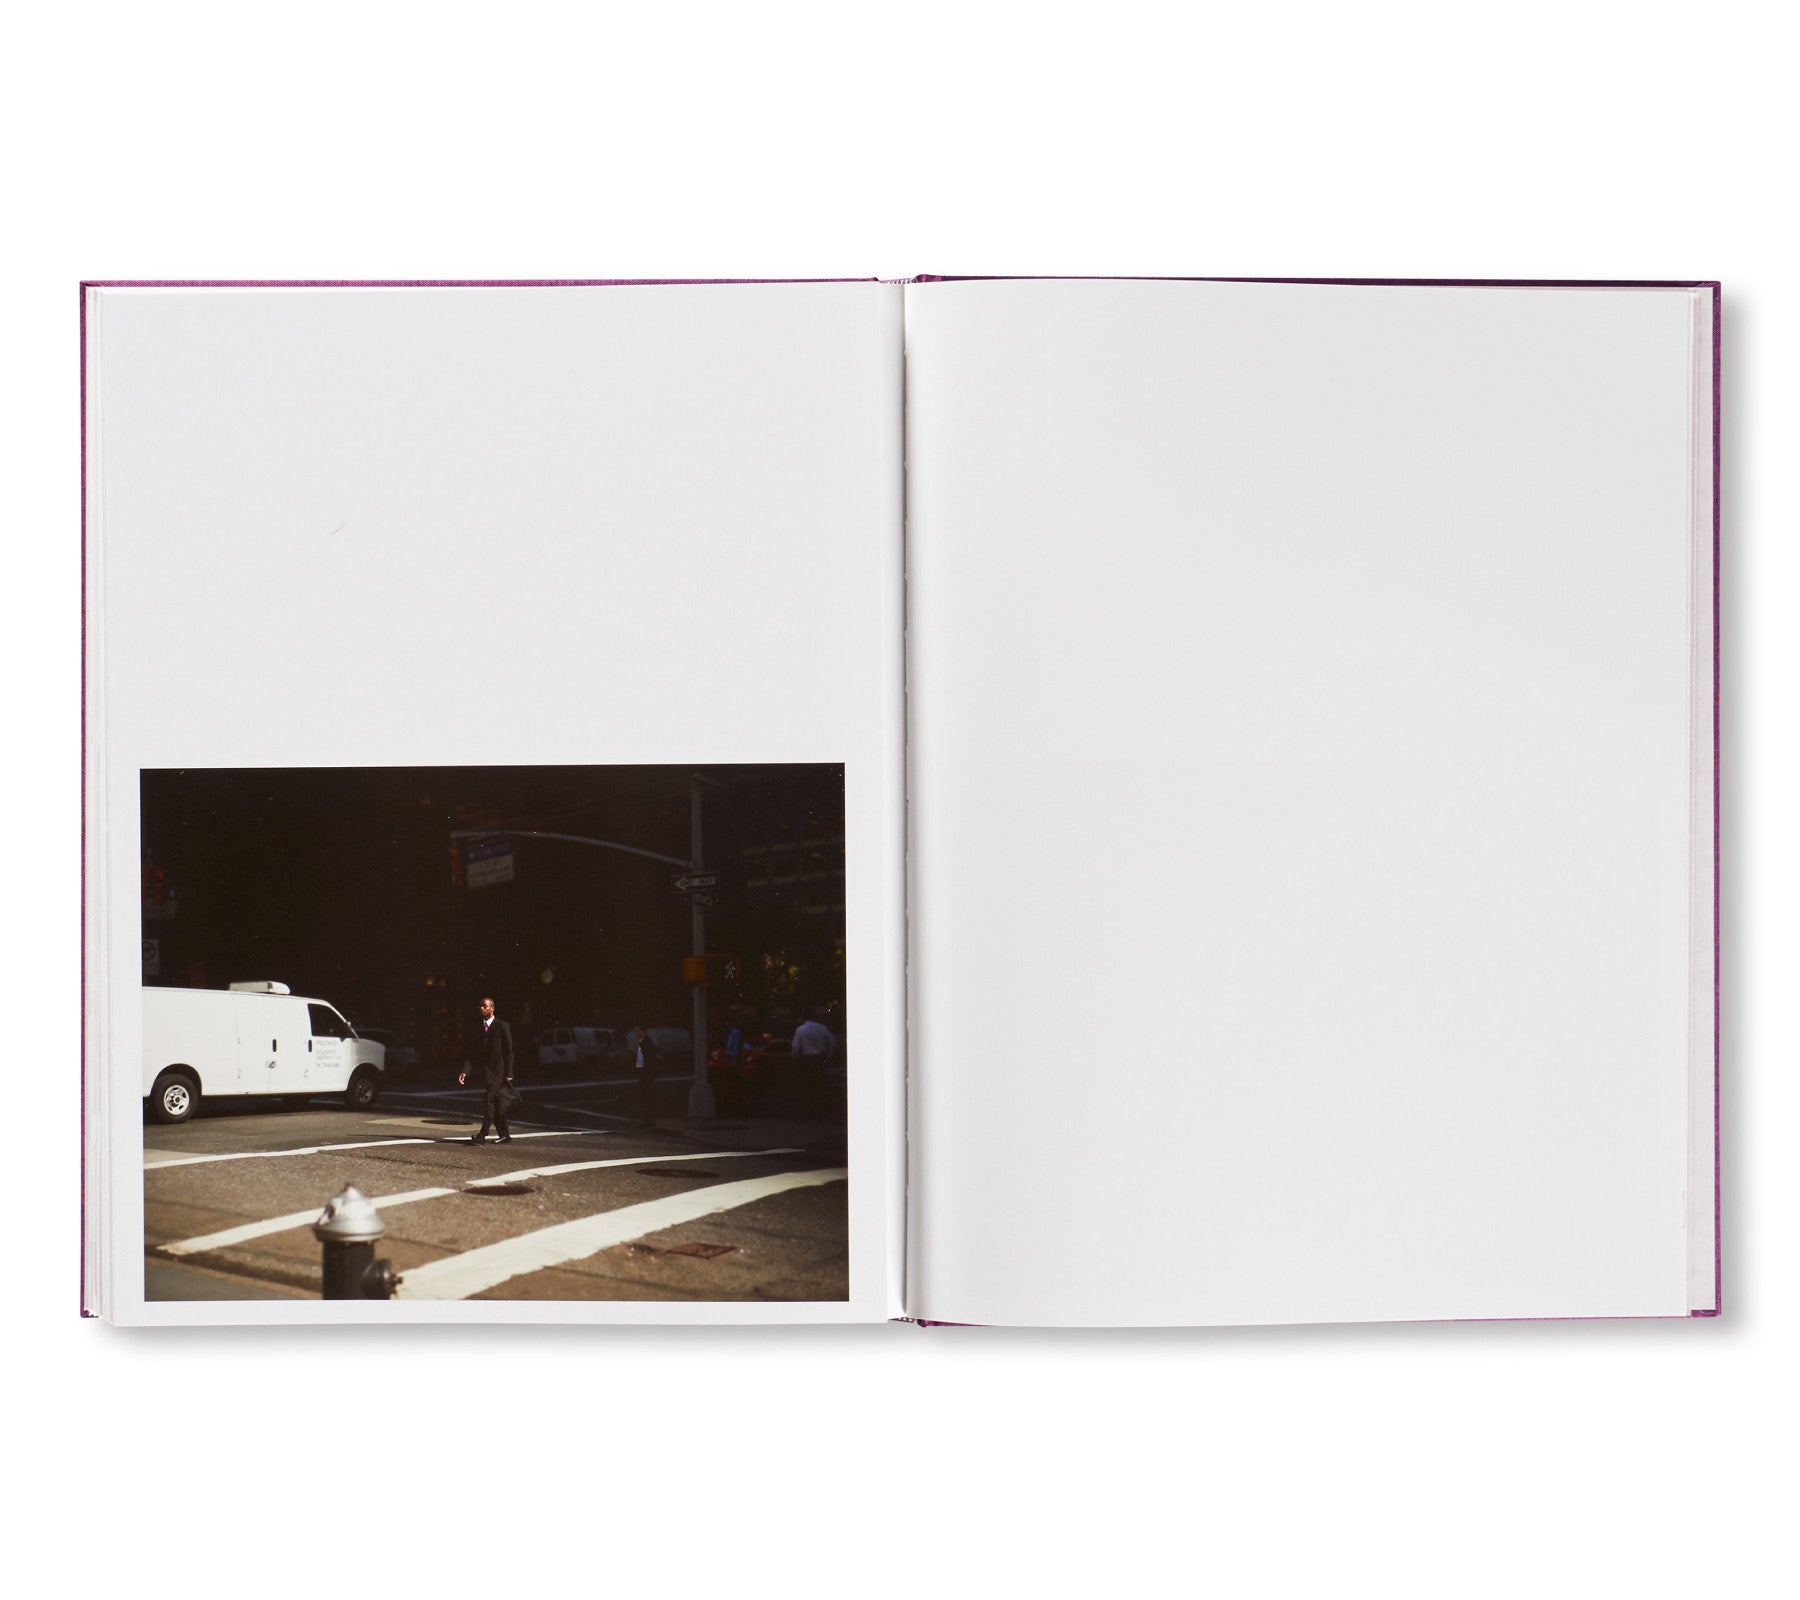 THE PRESENT by Paul Graham [SPECIAL EDITION]